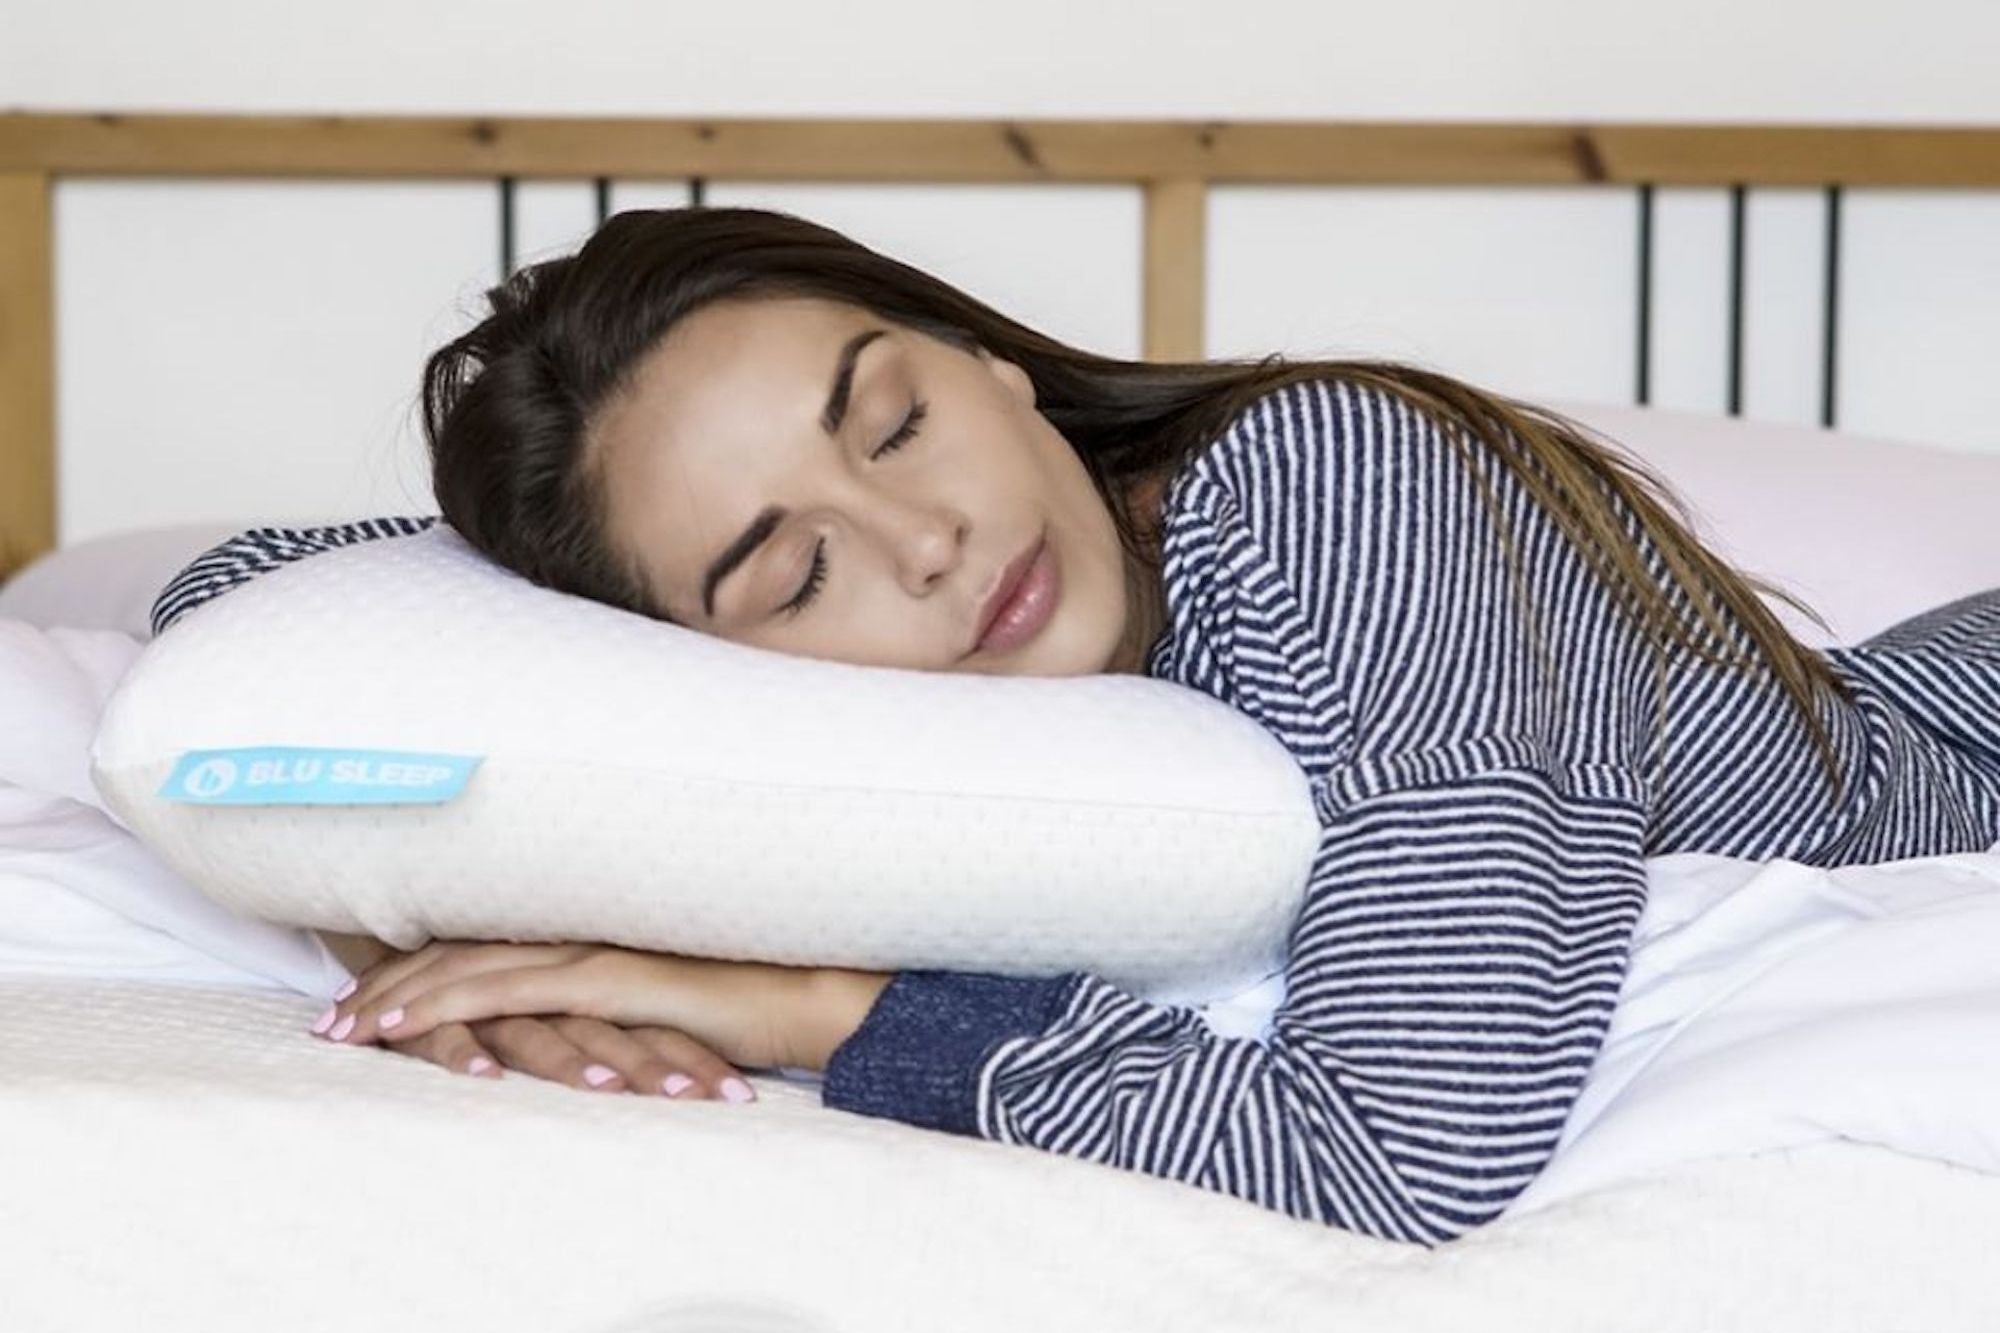 These Pillows Can Help You Get a Better Night